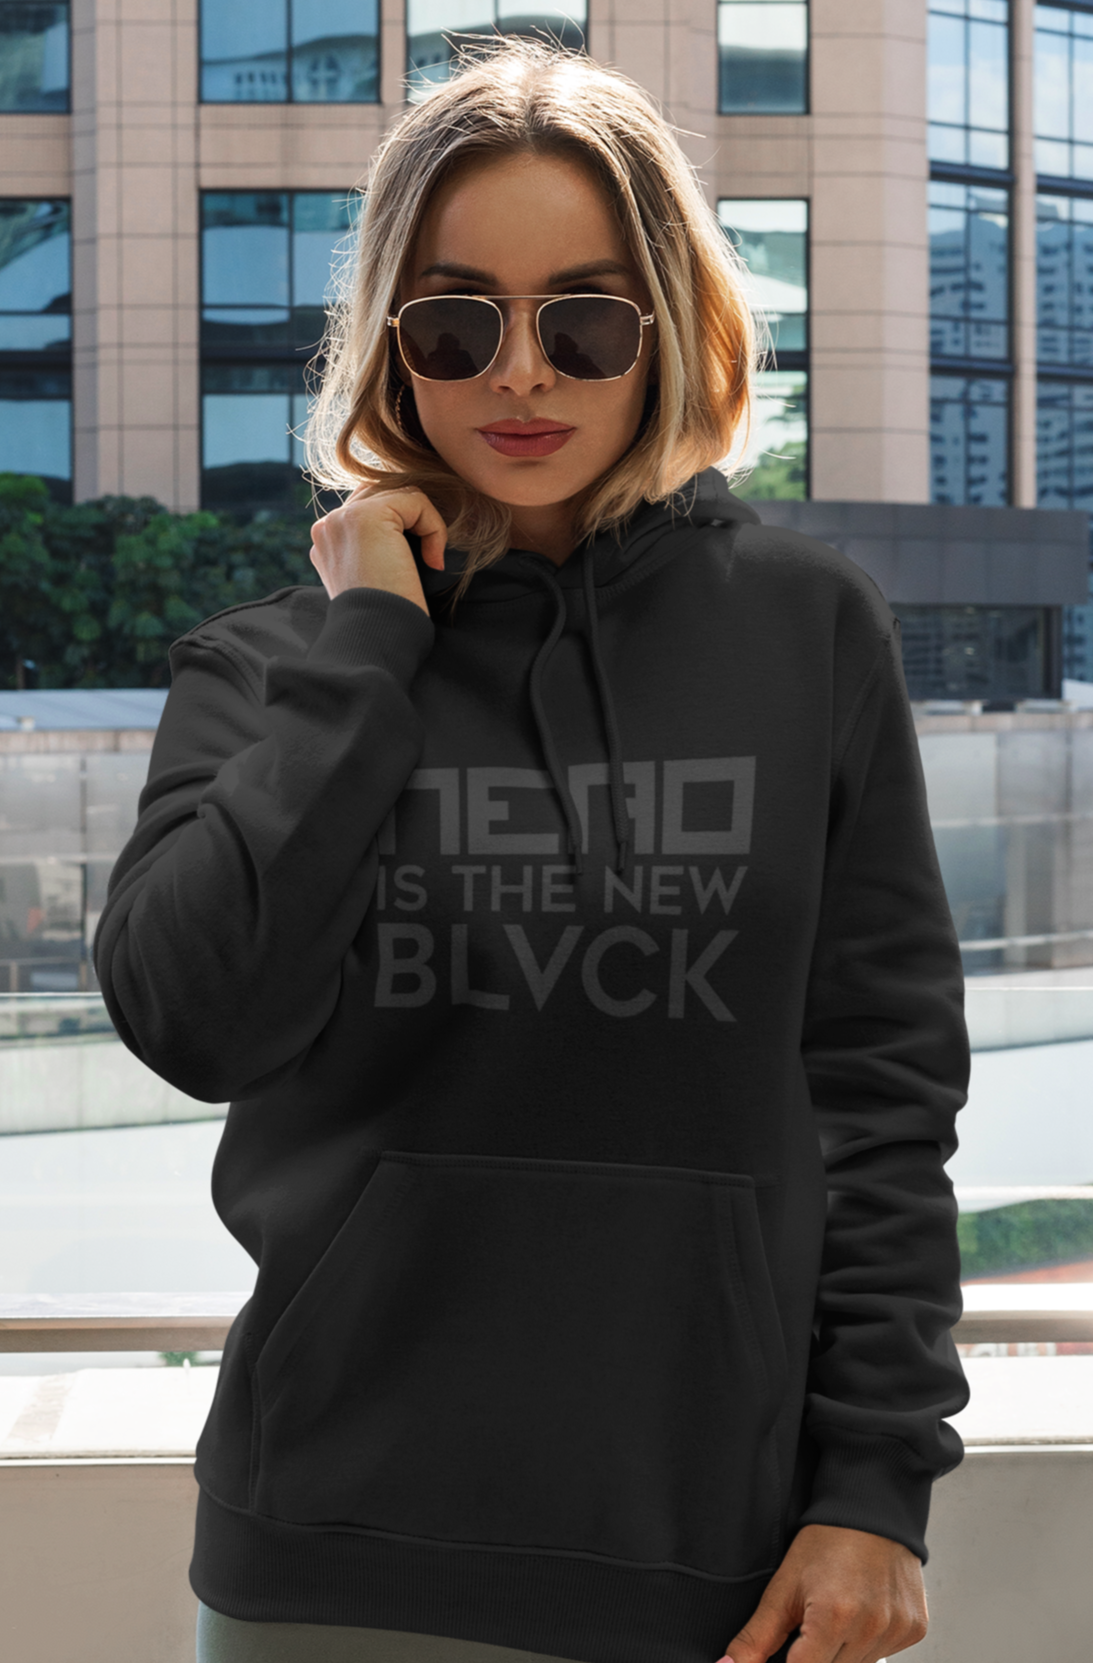 NERO IS THE NEW BLVCK - Unisex Hoodie